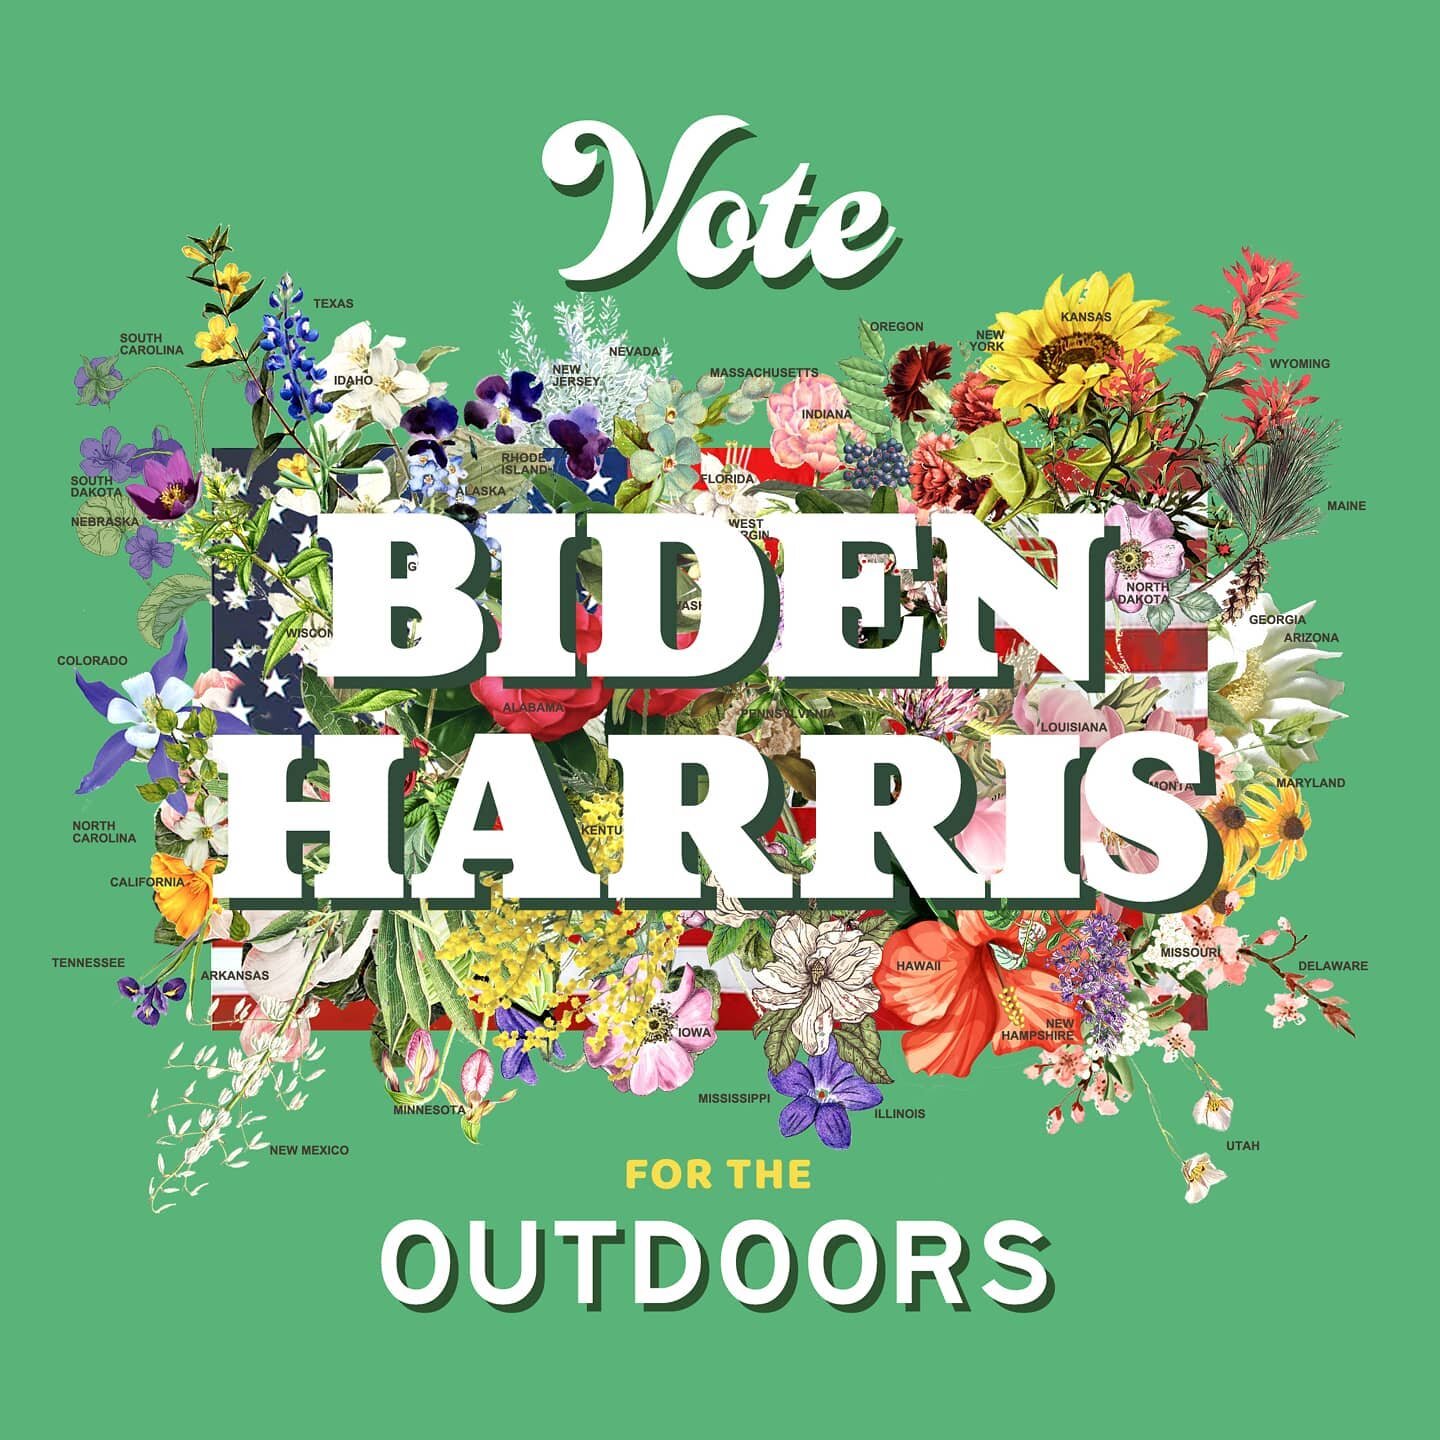 Team, I am delighted to stand beside many of my friends in the outdoor athlete space and endorse the Biden/Harris ticket for the 2020 election.

Biden and Harris are defenders of public land, environmental justice &amp; regulation, and climate change